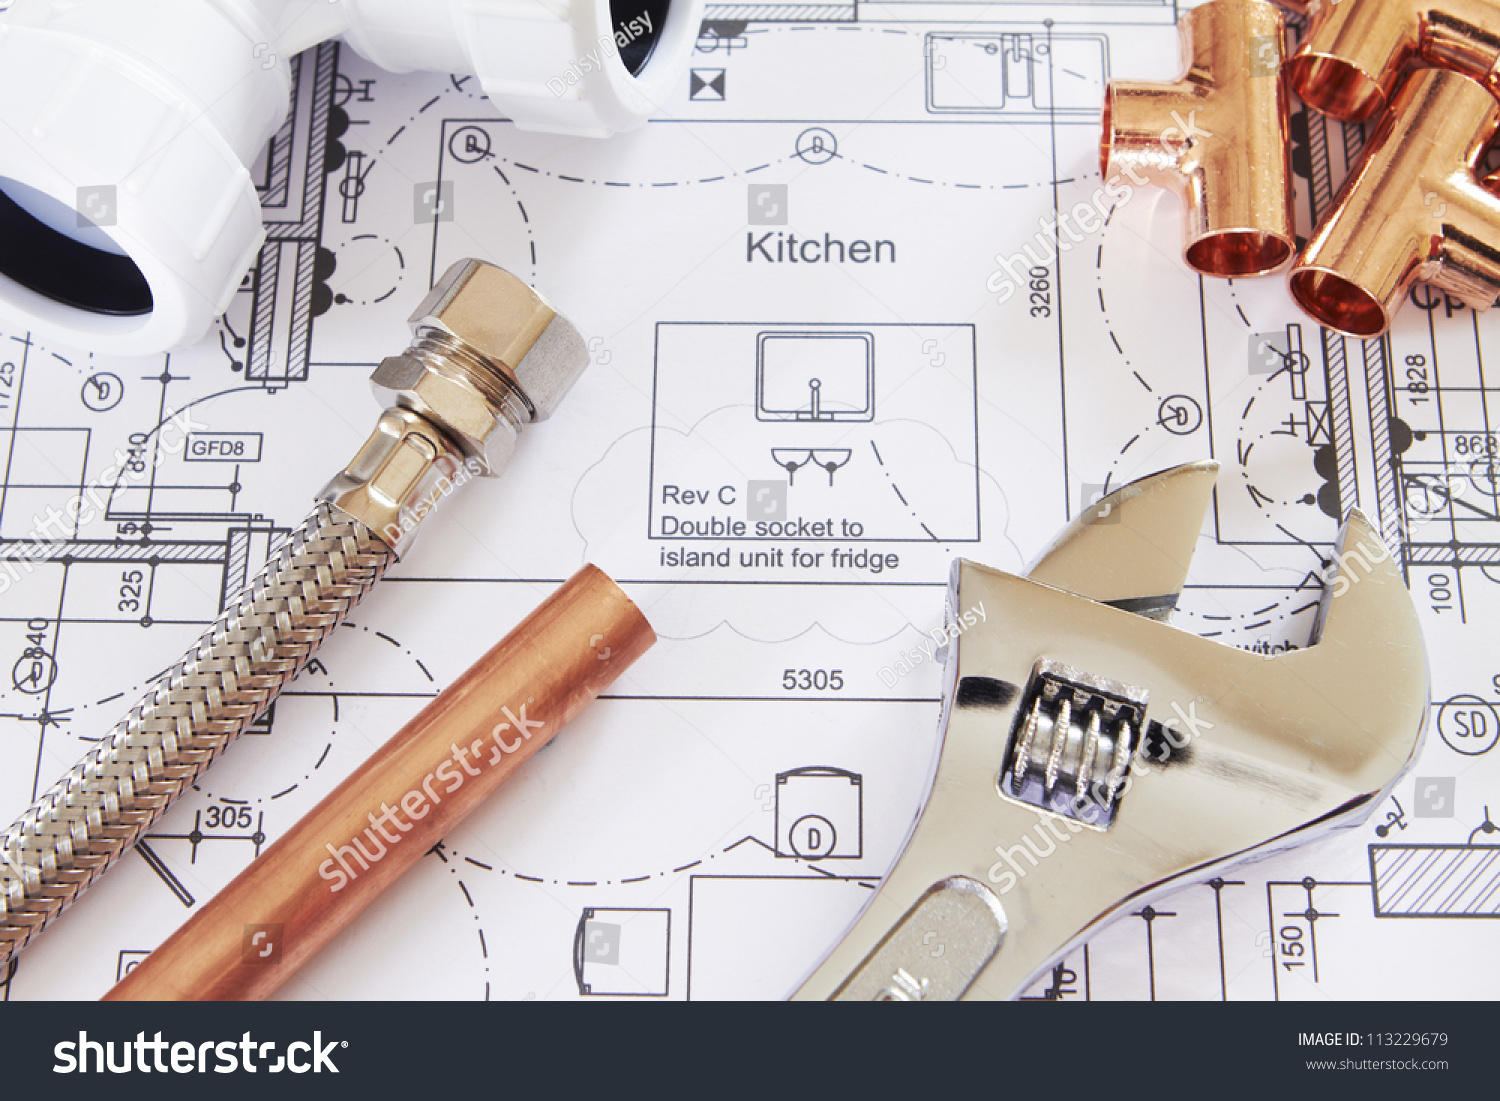 Plumbing Tools Arranged On House Plans #113229679